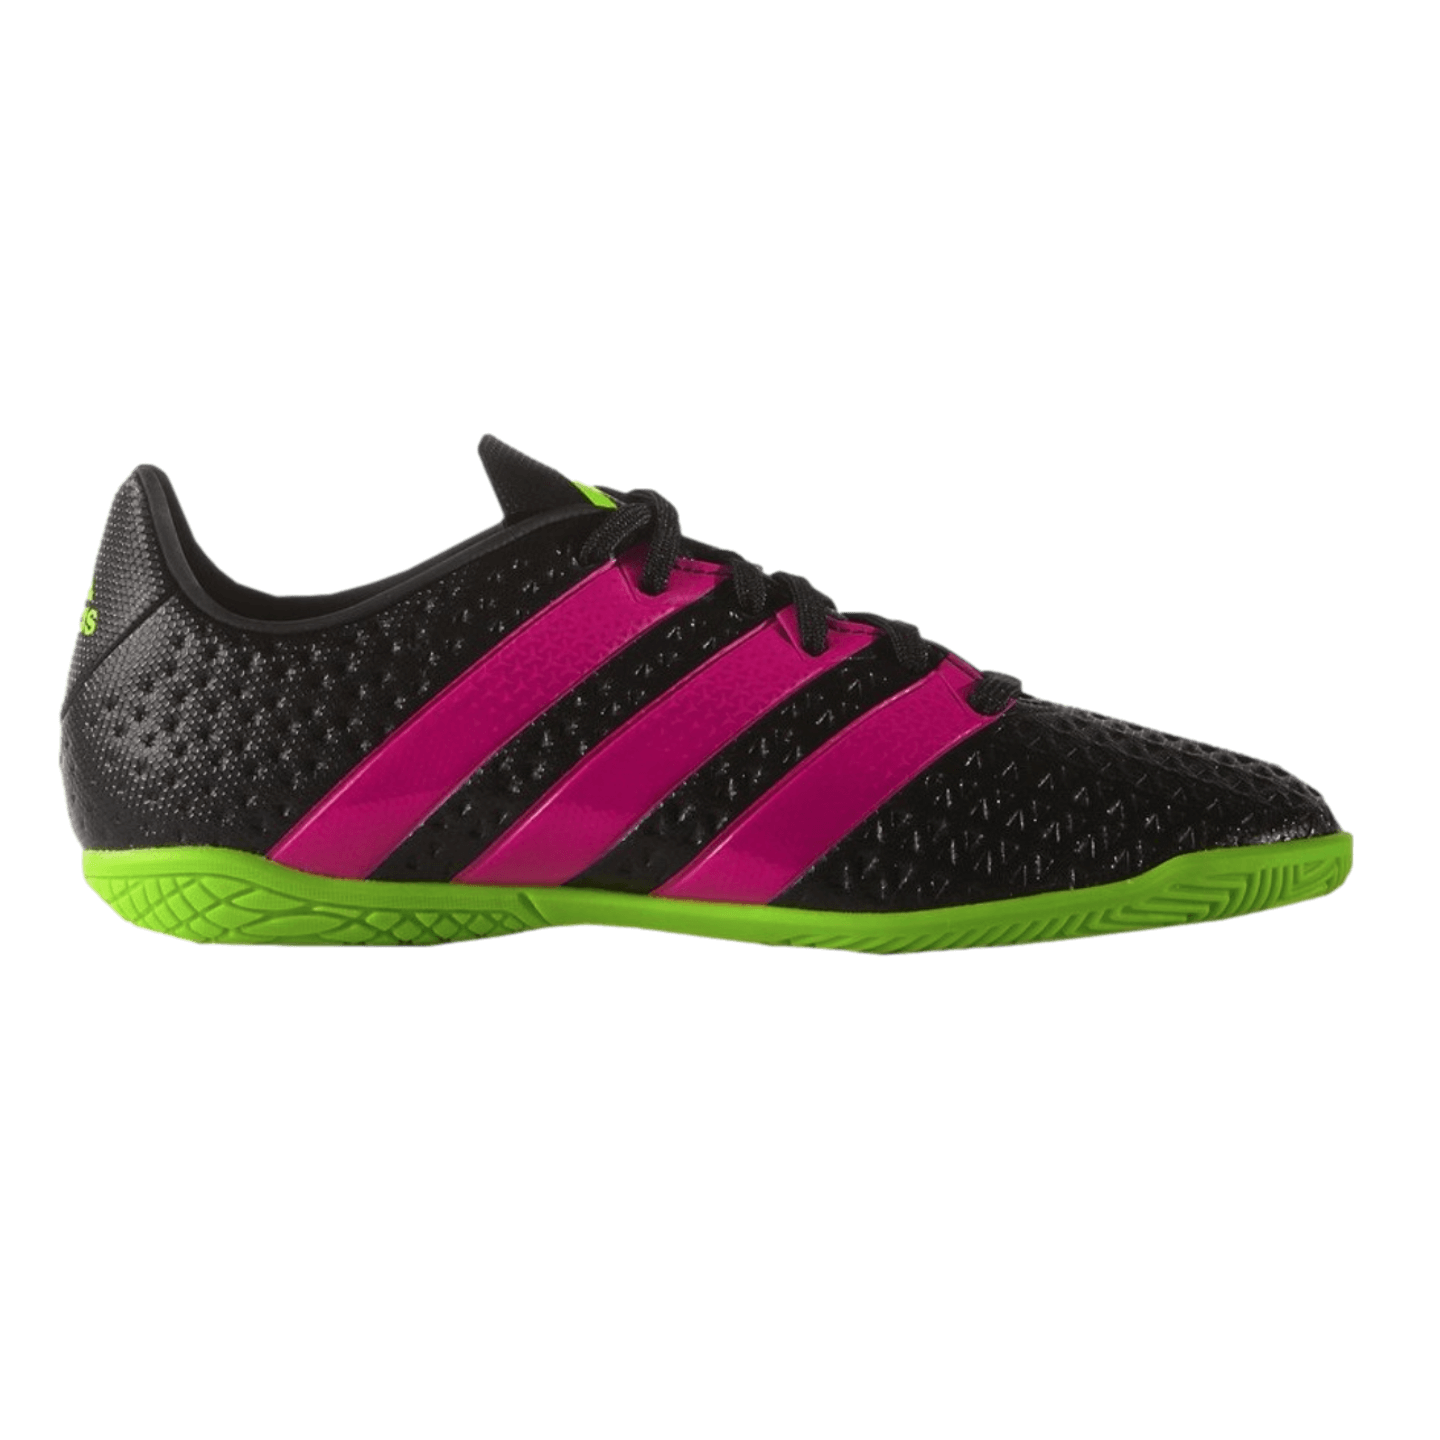 Adidas Ace 16.4 Youth Indoor Shoes